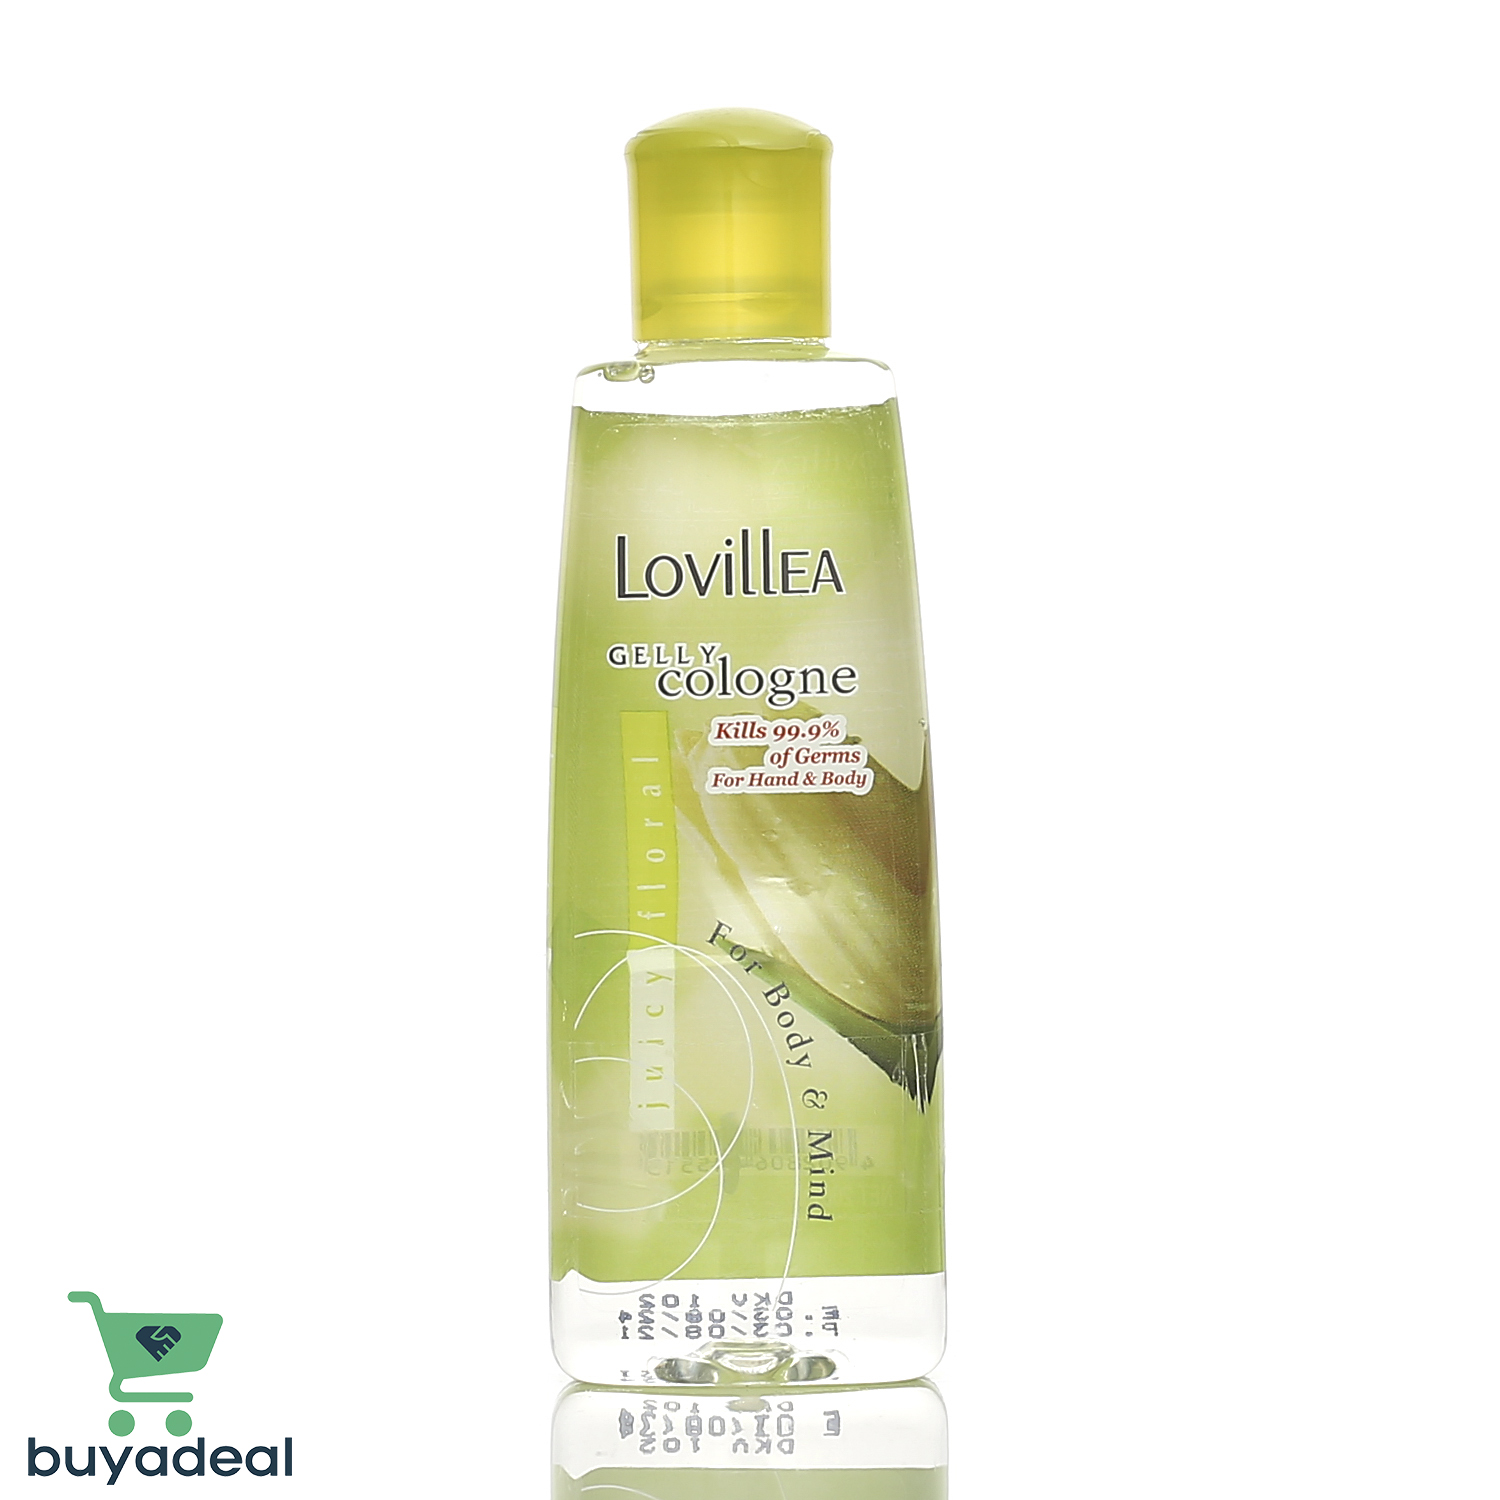 Buyadeal Product  lovillea Gelly Cologne Juicy Floral- 100ml